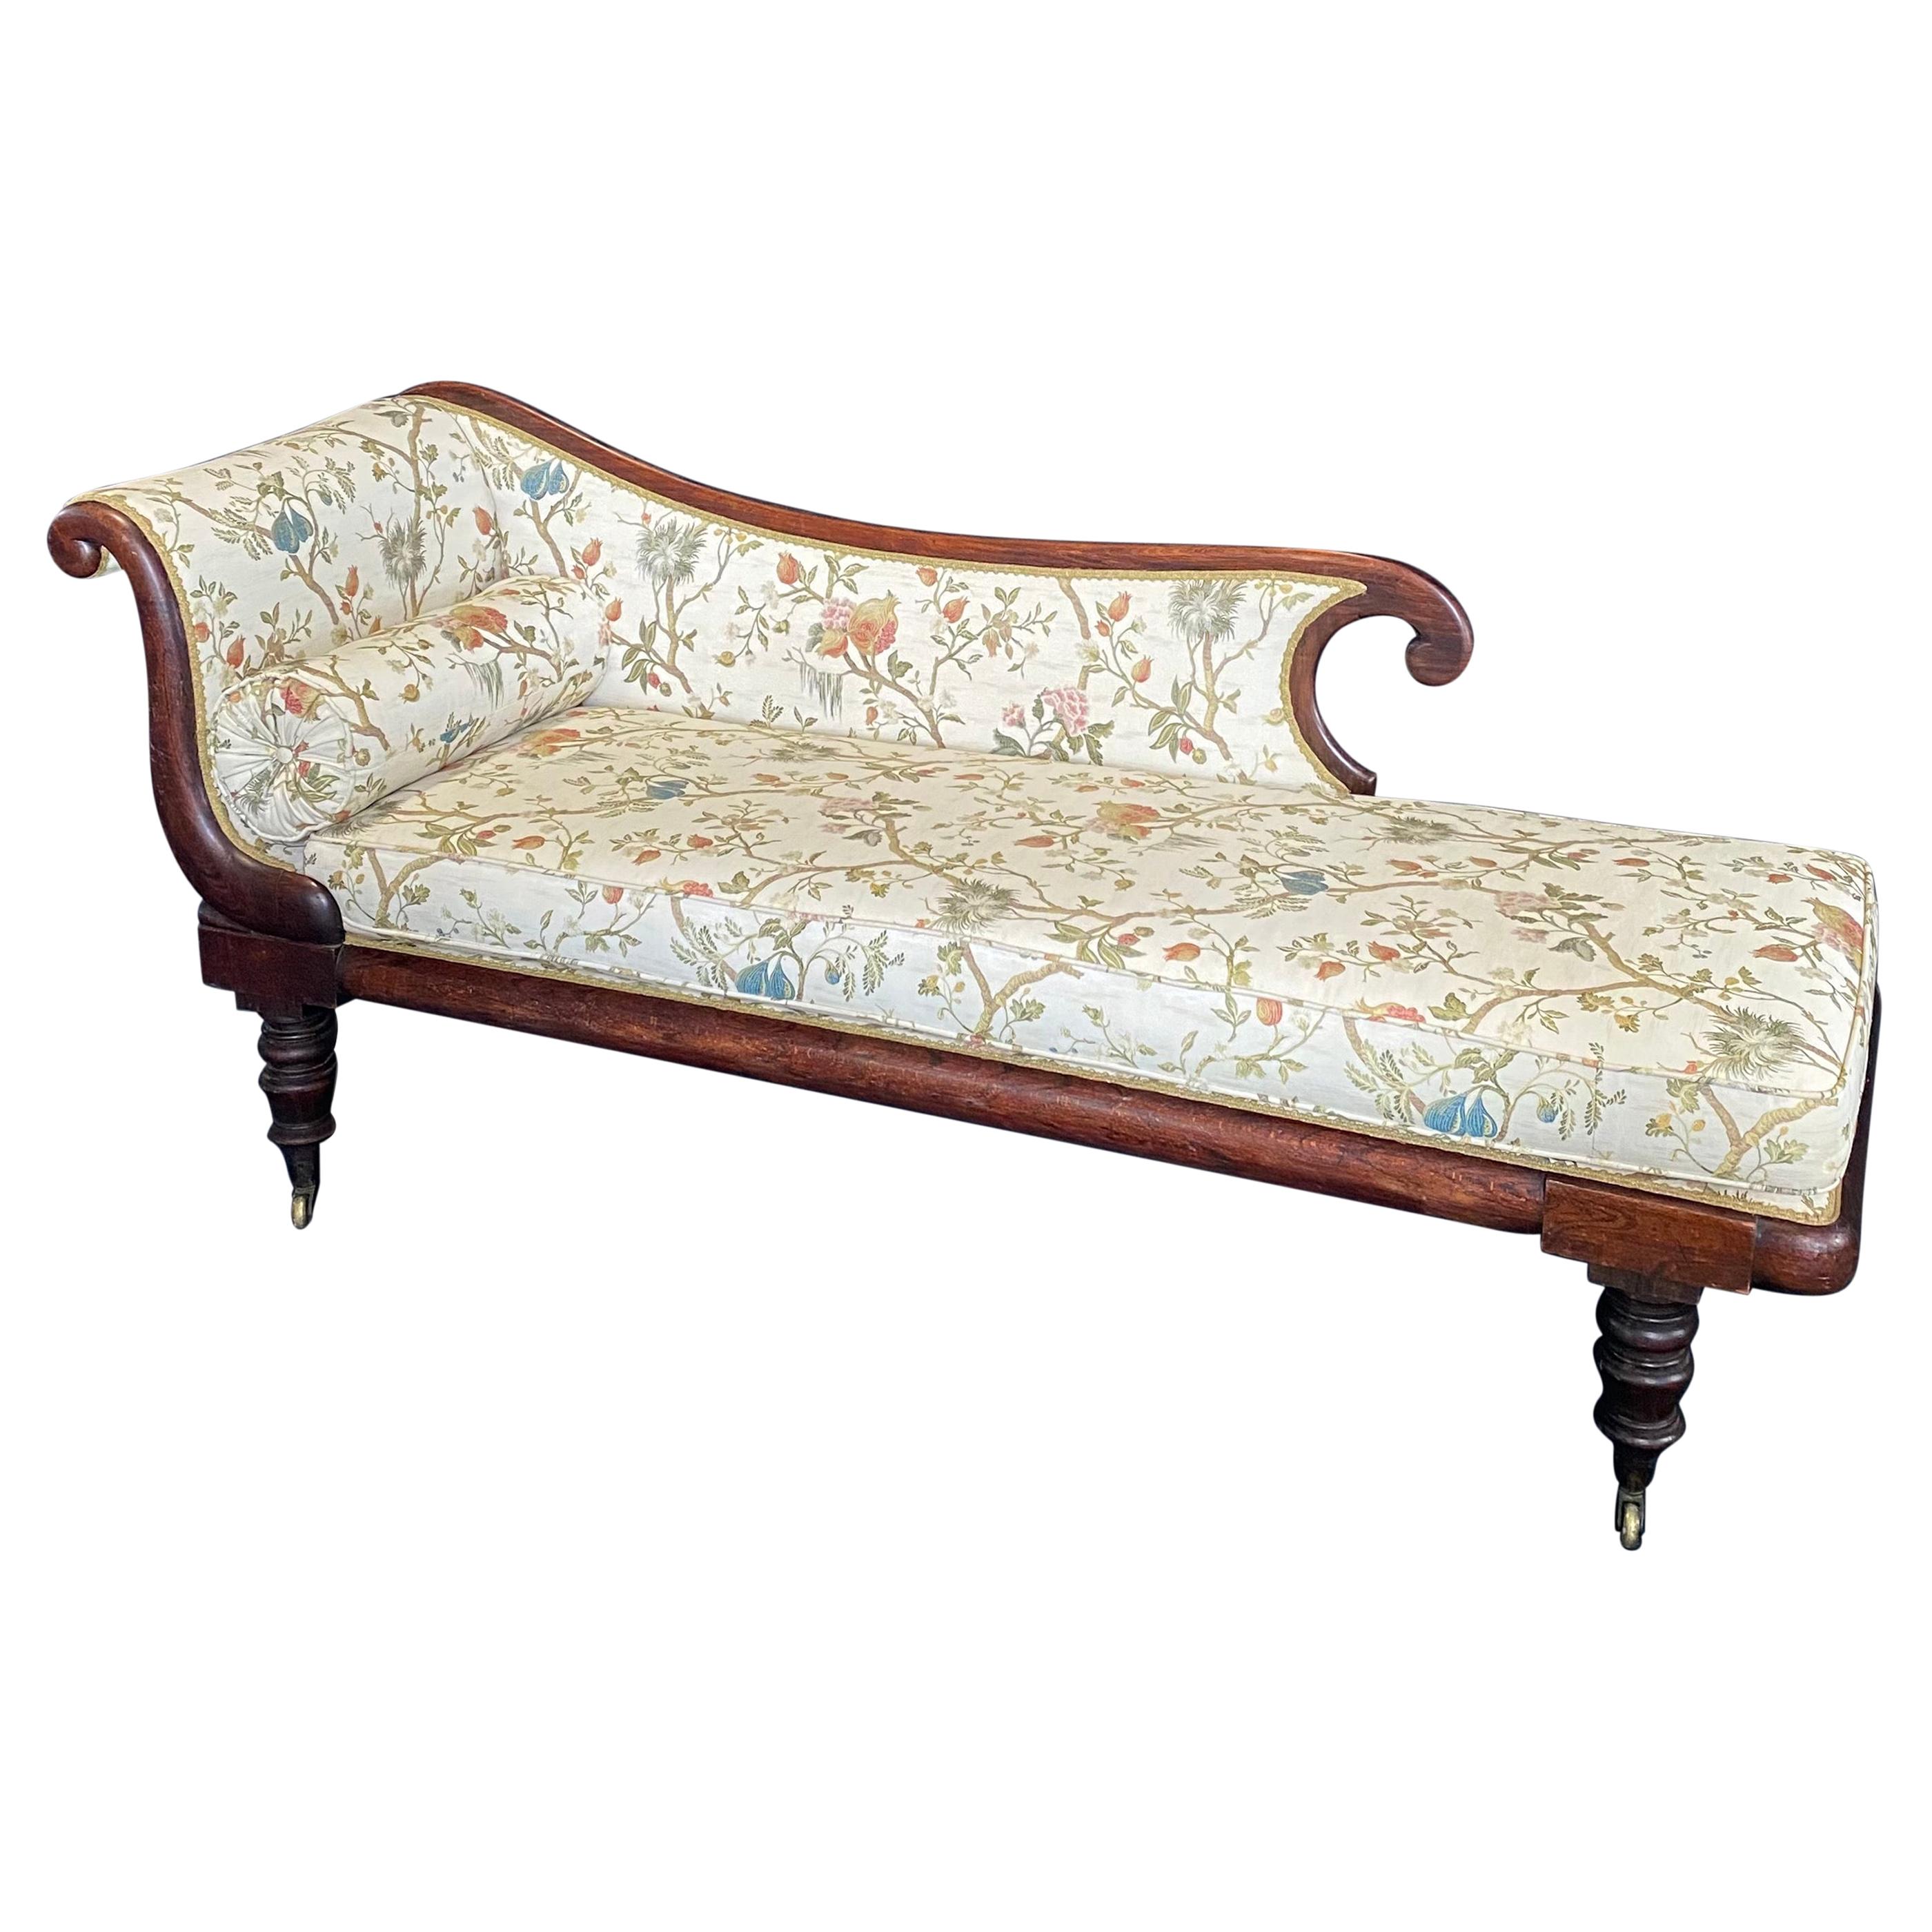 Romantic 19th Century French Recamier Chaise Lounge Sofa